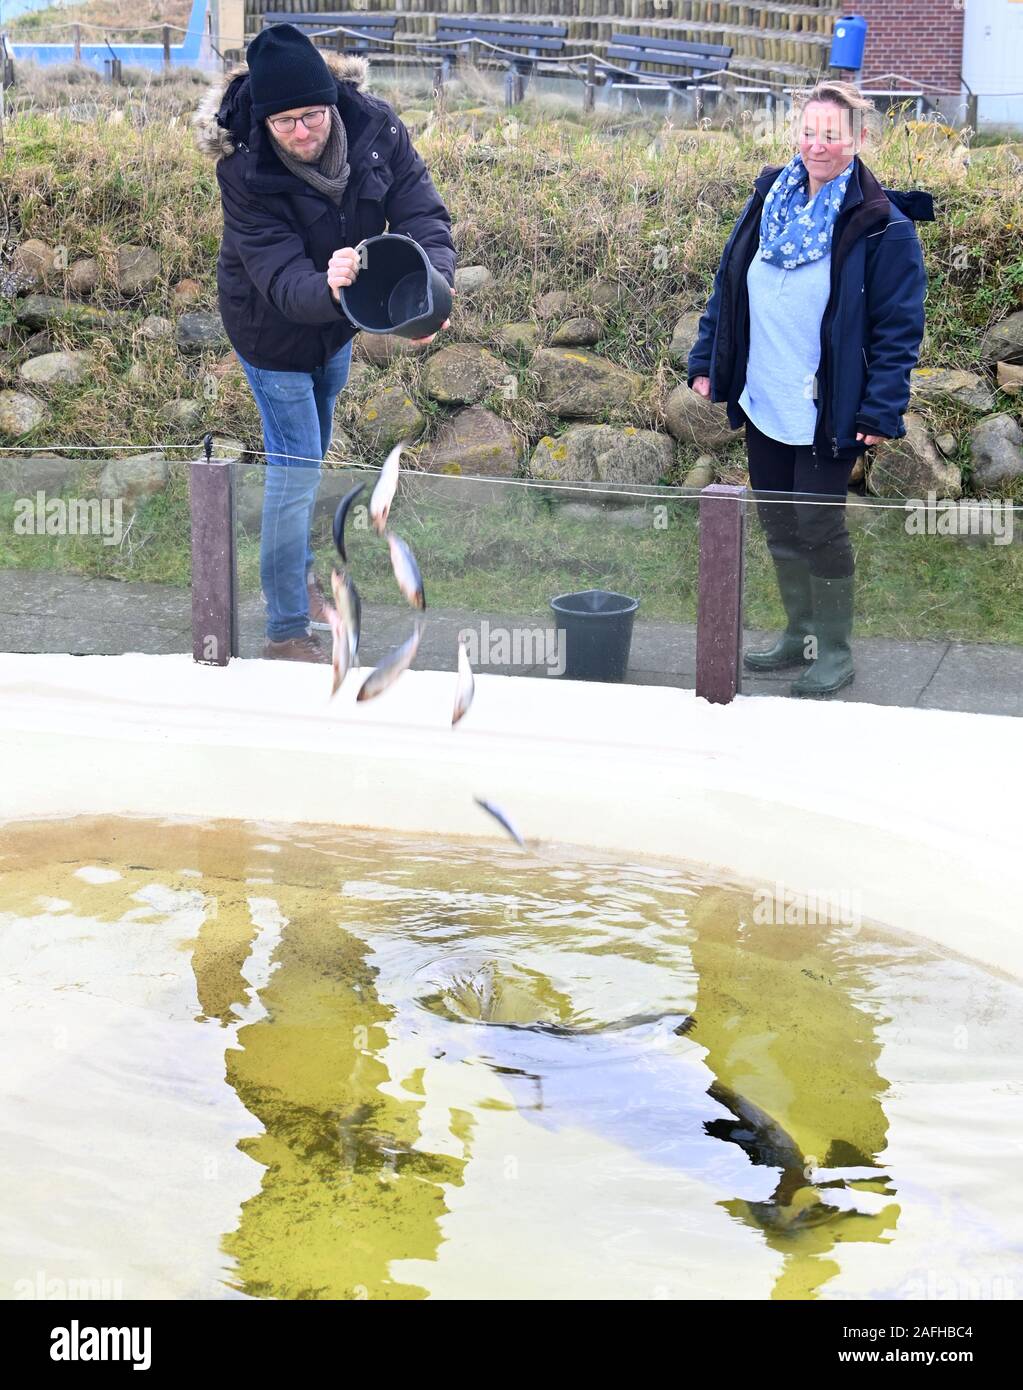 Friedrichskoog, Germany. 16th Dec, 2019. Jan Philipp Albrecht (Bündnis90/Die Grünen), Schleswig-Holstein Minister for Energy Turnaround, Agriculture, Environment, Nature and Digitisation and Tanja Rosenberger, Head of the seal station, feed a howler after the laying of the foundation stone for the extension and reconstruction of the seal station. In addition to a new entrance building and exterior modernizations, a new exhibition building with a seal observation room is planned. Credit: Carsten Rehder/dpa/Alamy Live News Stock Photo